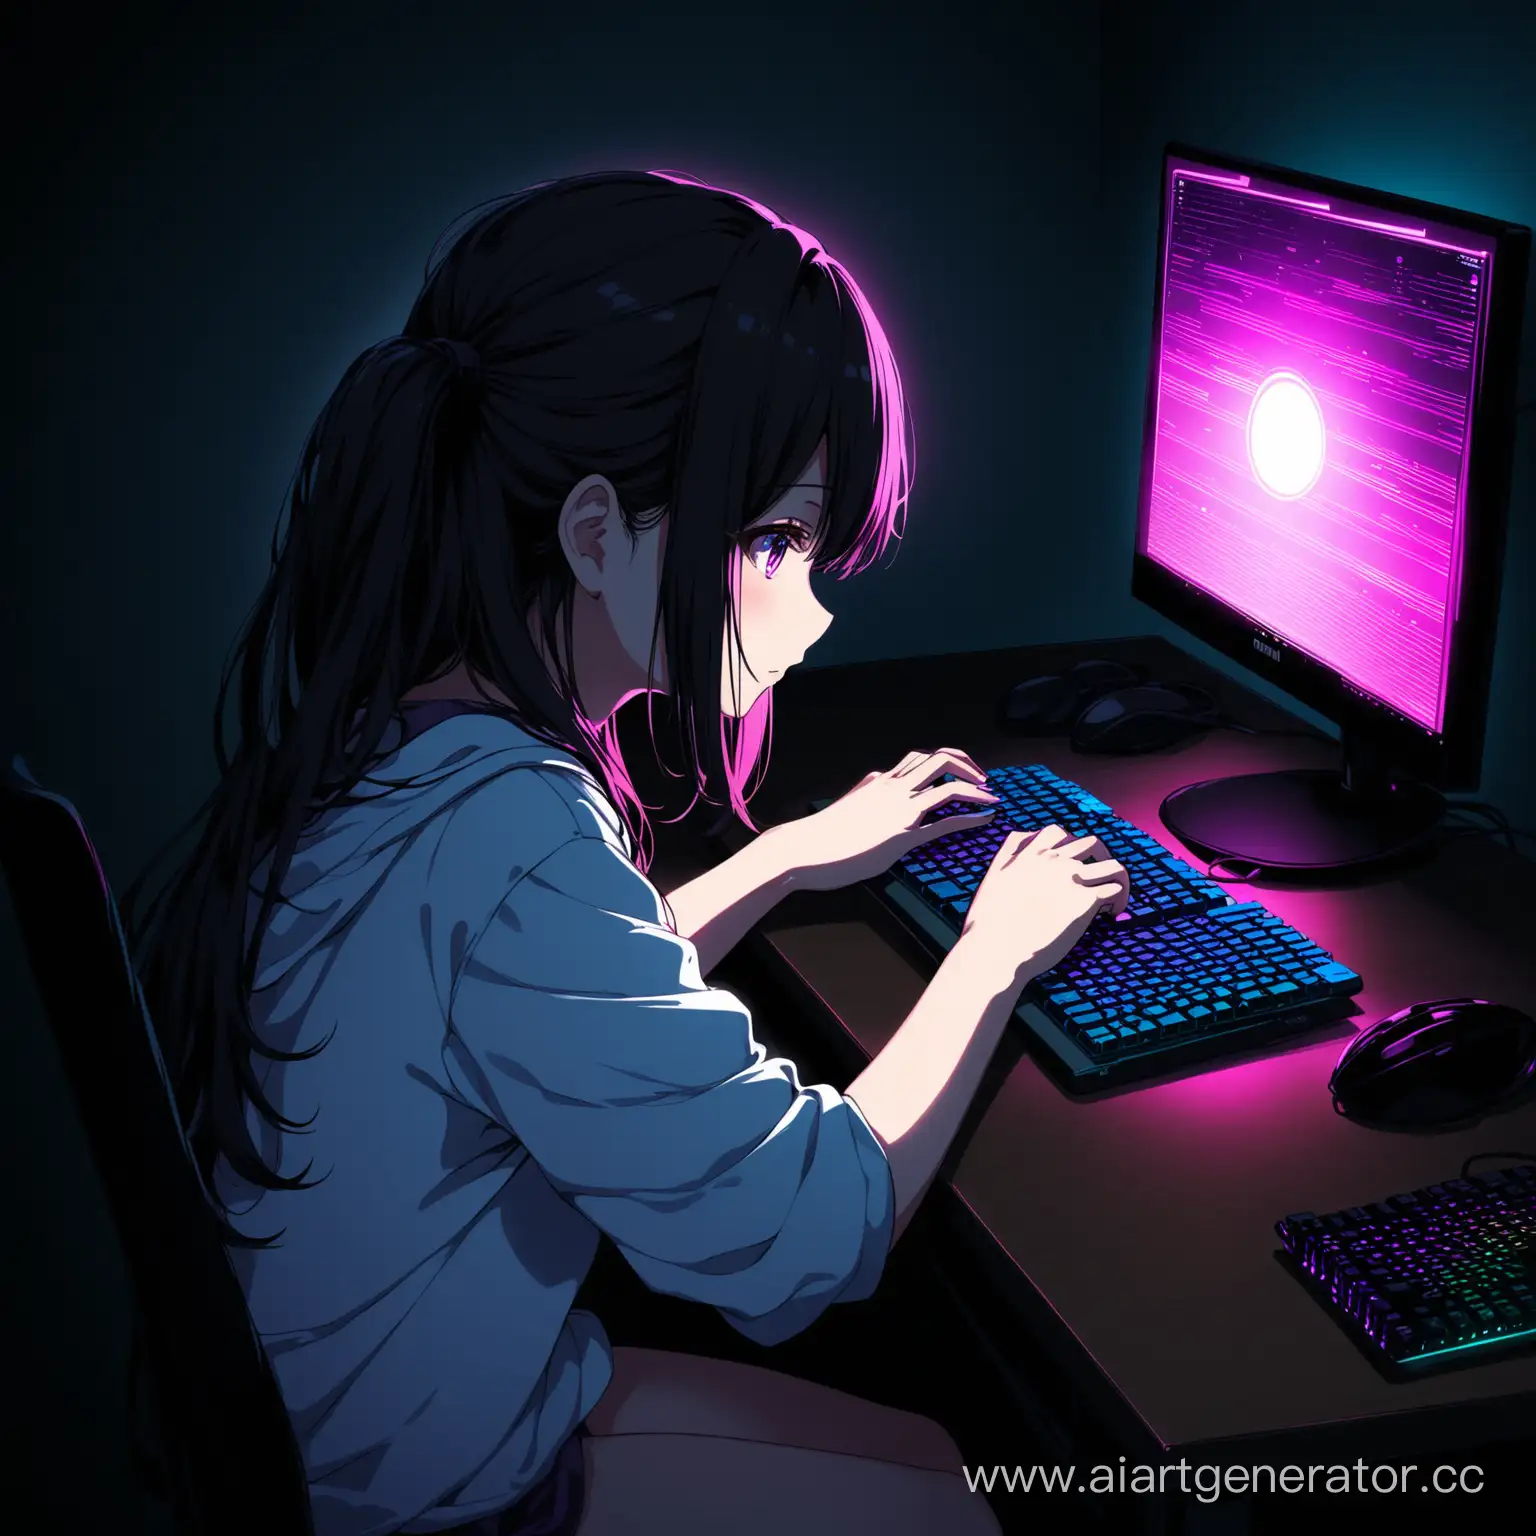 Anime-Girl-Playing-PC-in-Dark-Room-with-RGB-Lighting